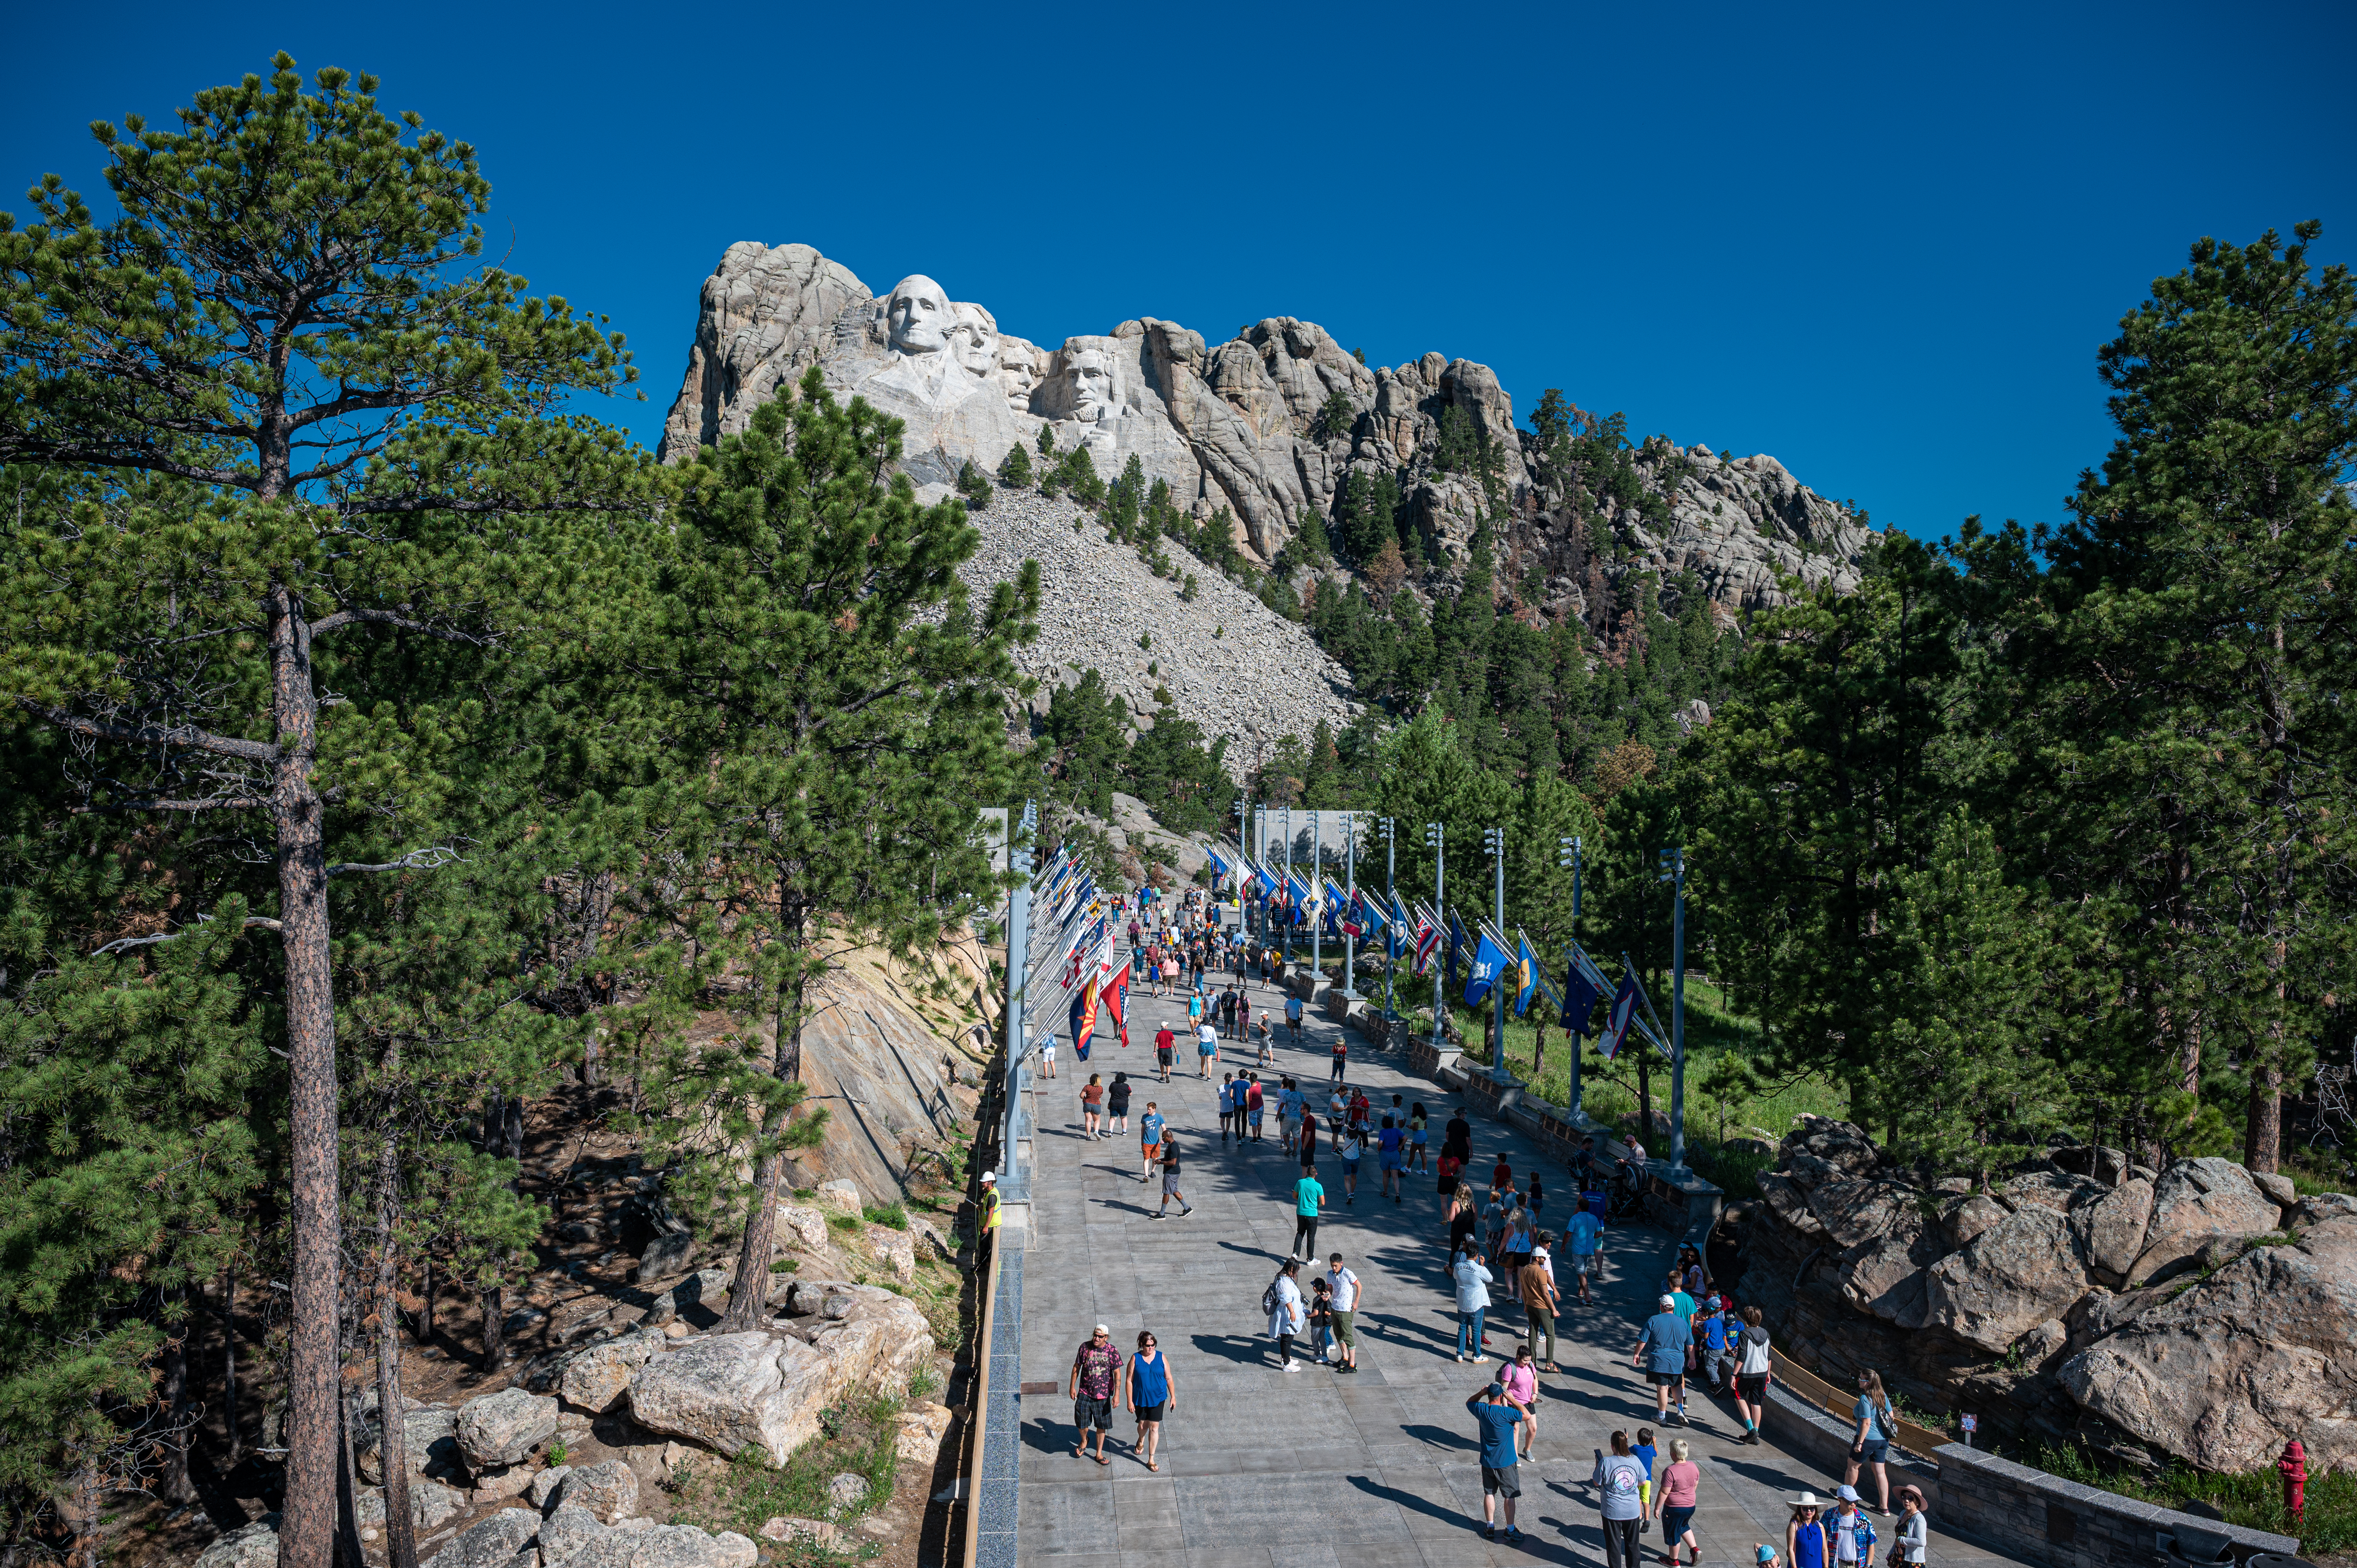 A concrete walkway with state flags on either side leading to Mount Rushmore. Dozens of people are on the walkway varying a variety of summer wear.